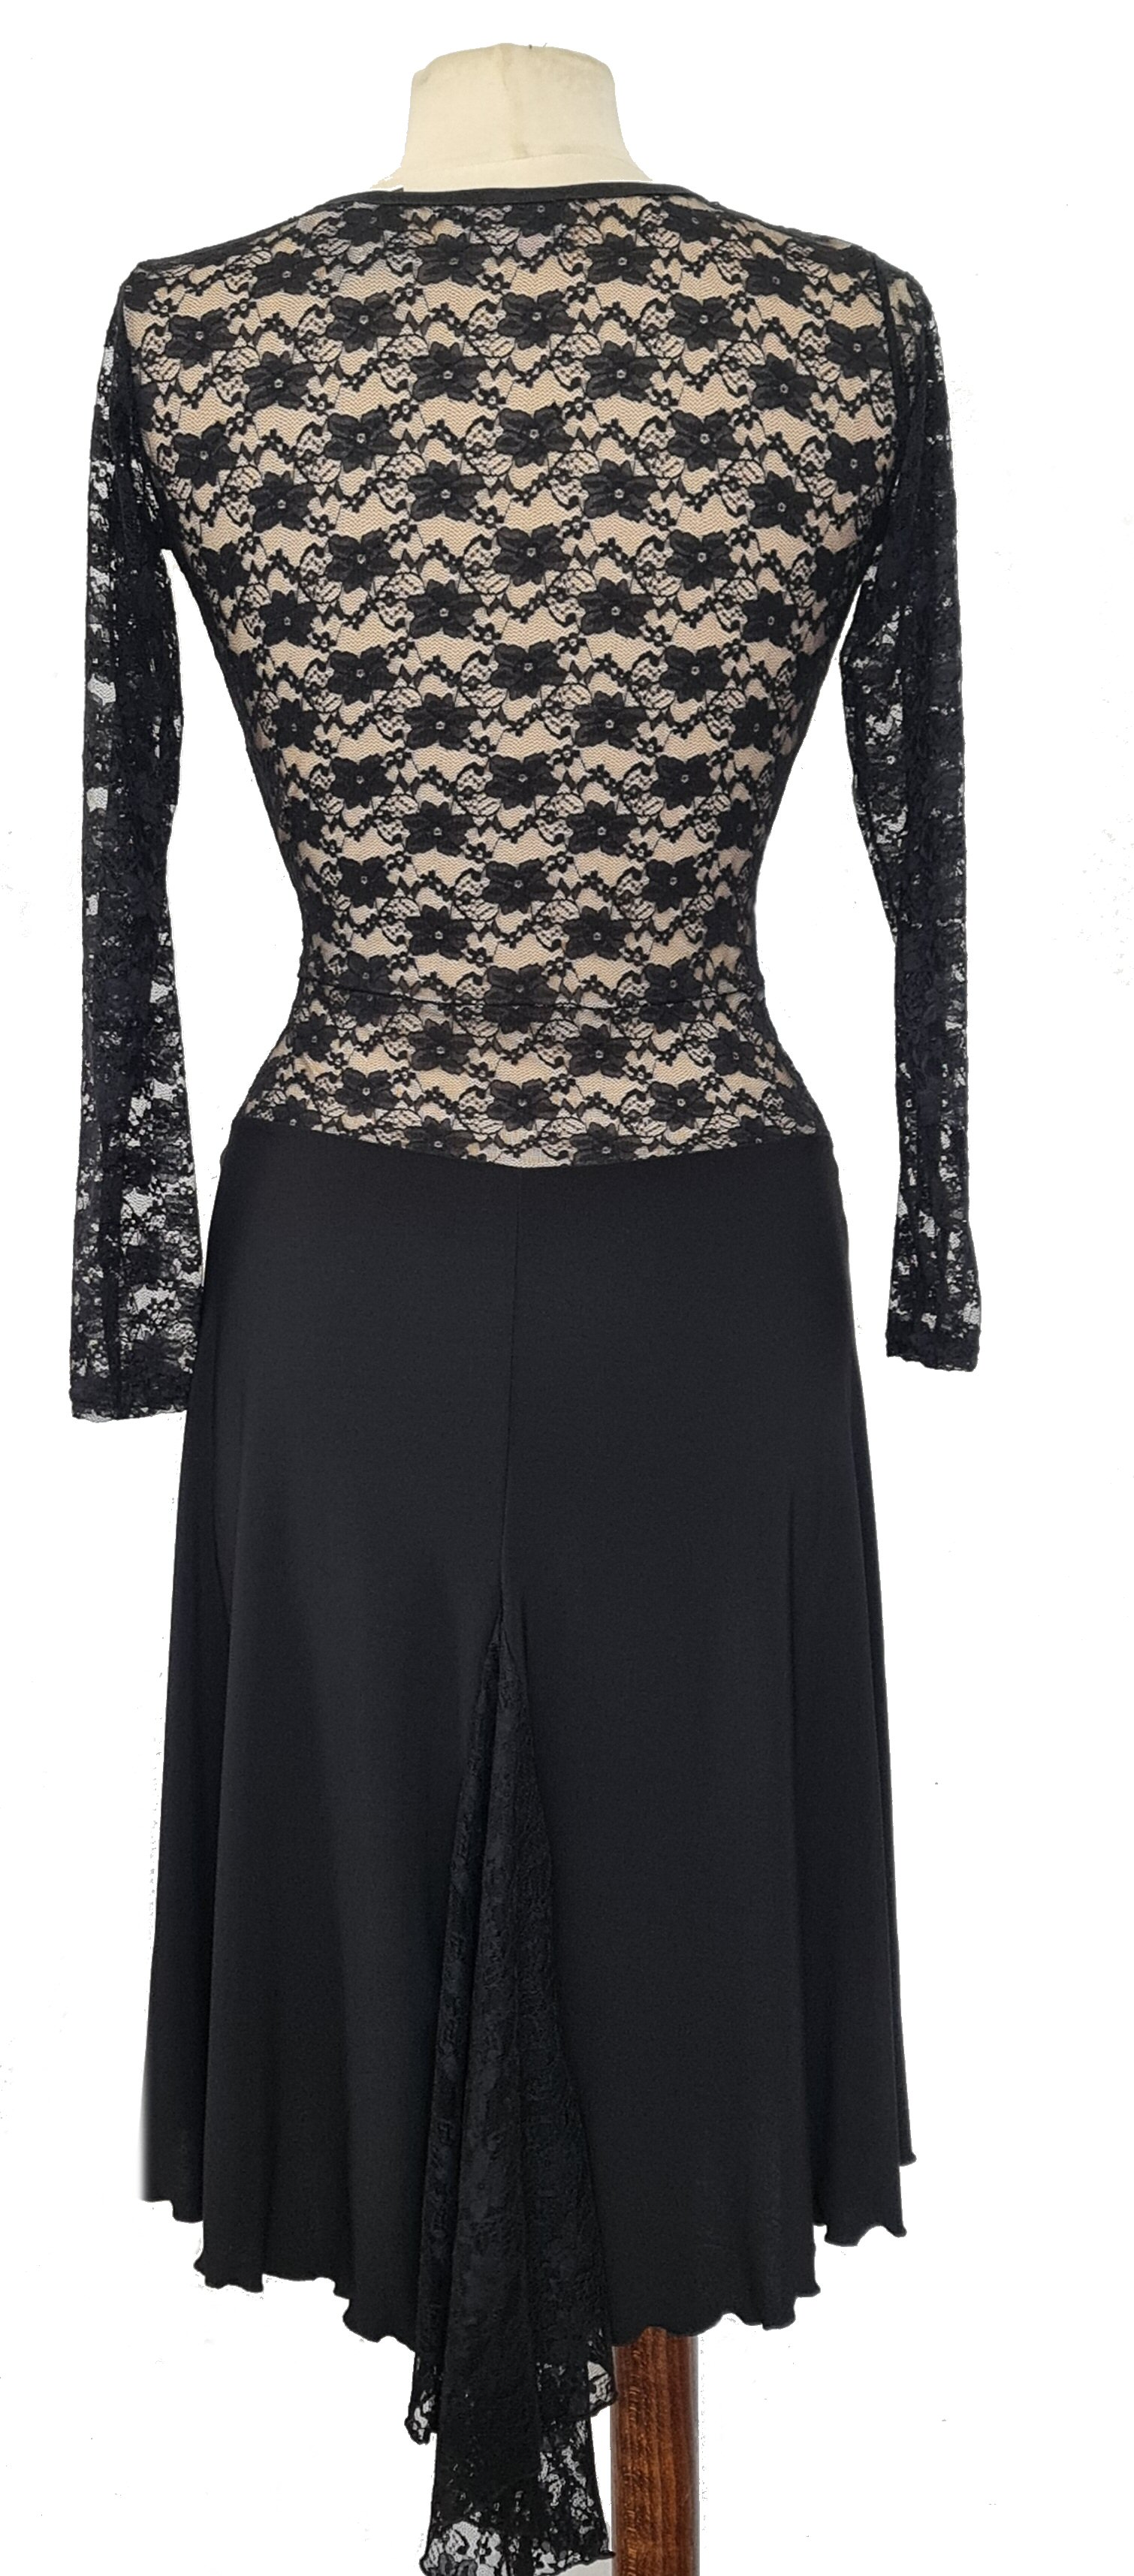 Argentine Tango dress with lace back and sleeves